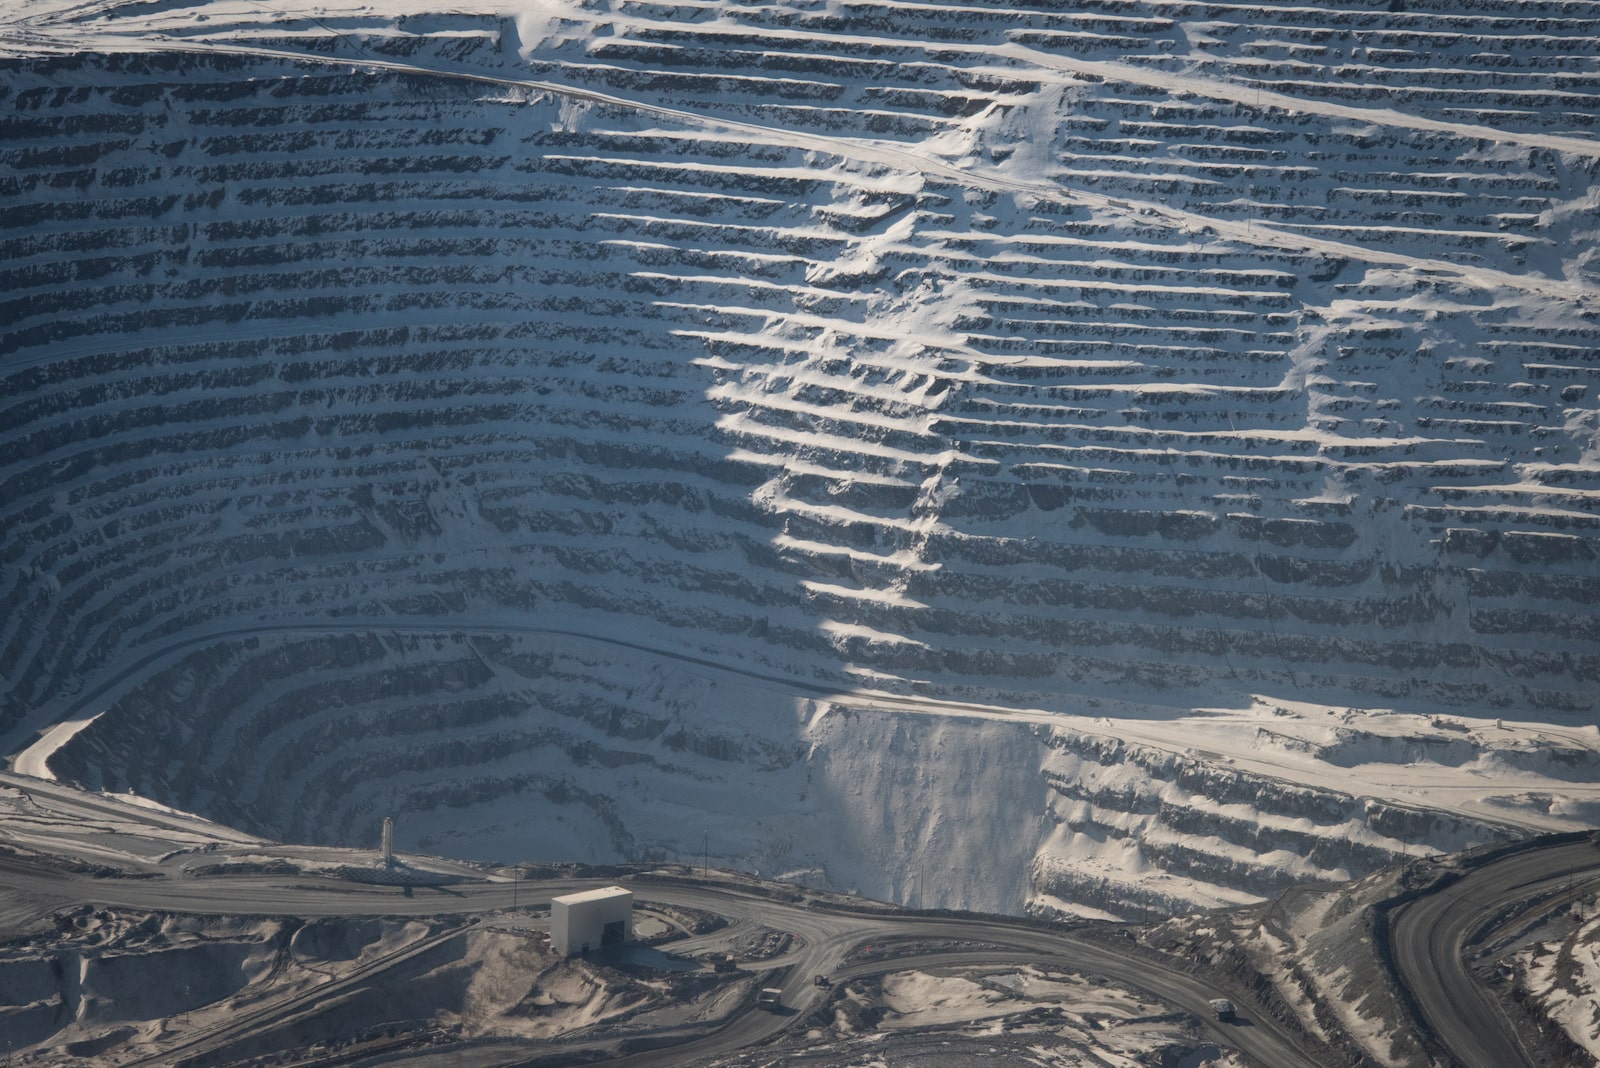 grooves cut into snowy ridges as part of a mine